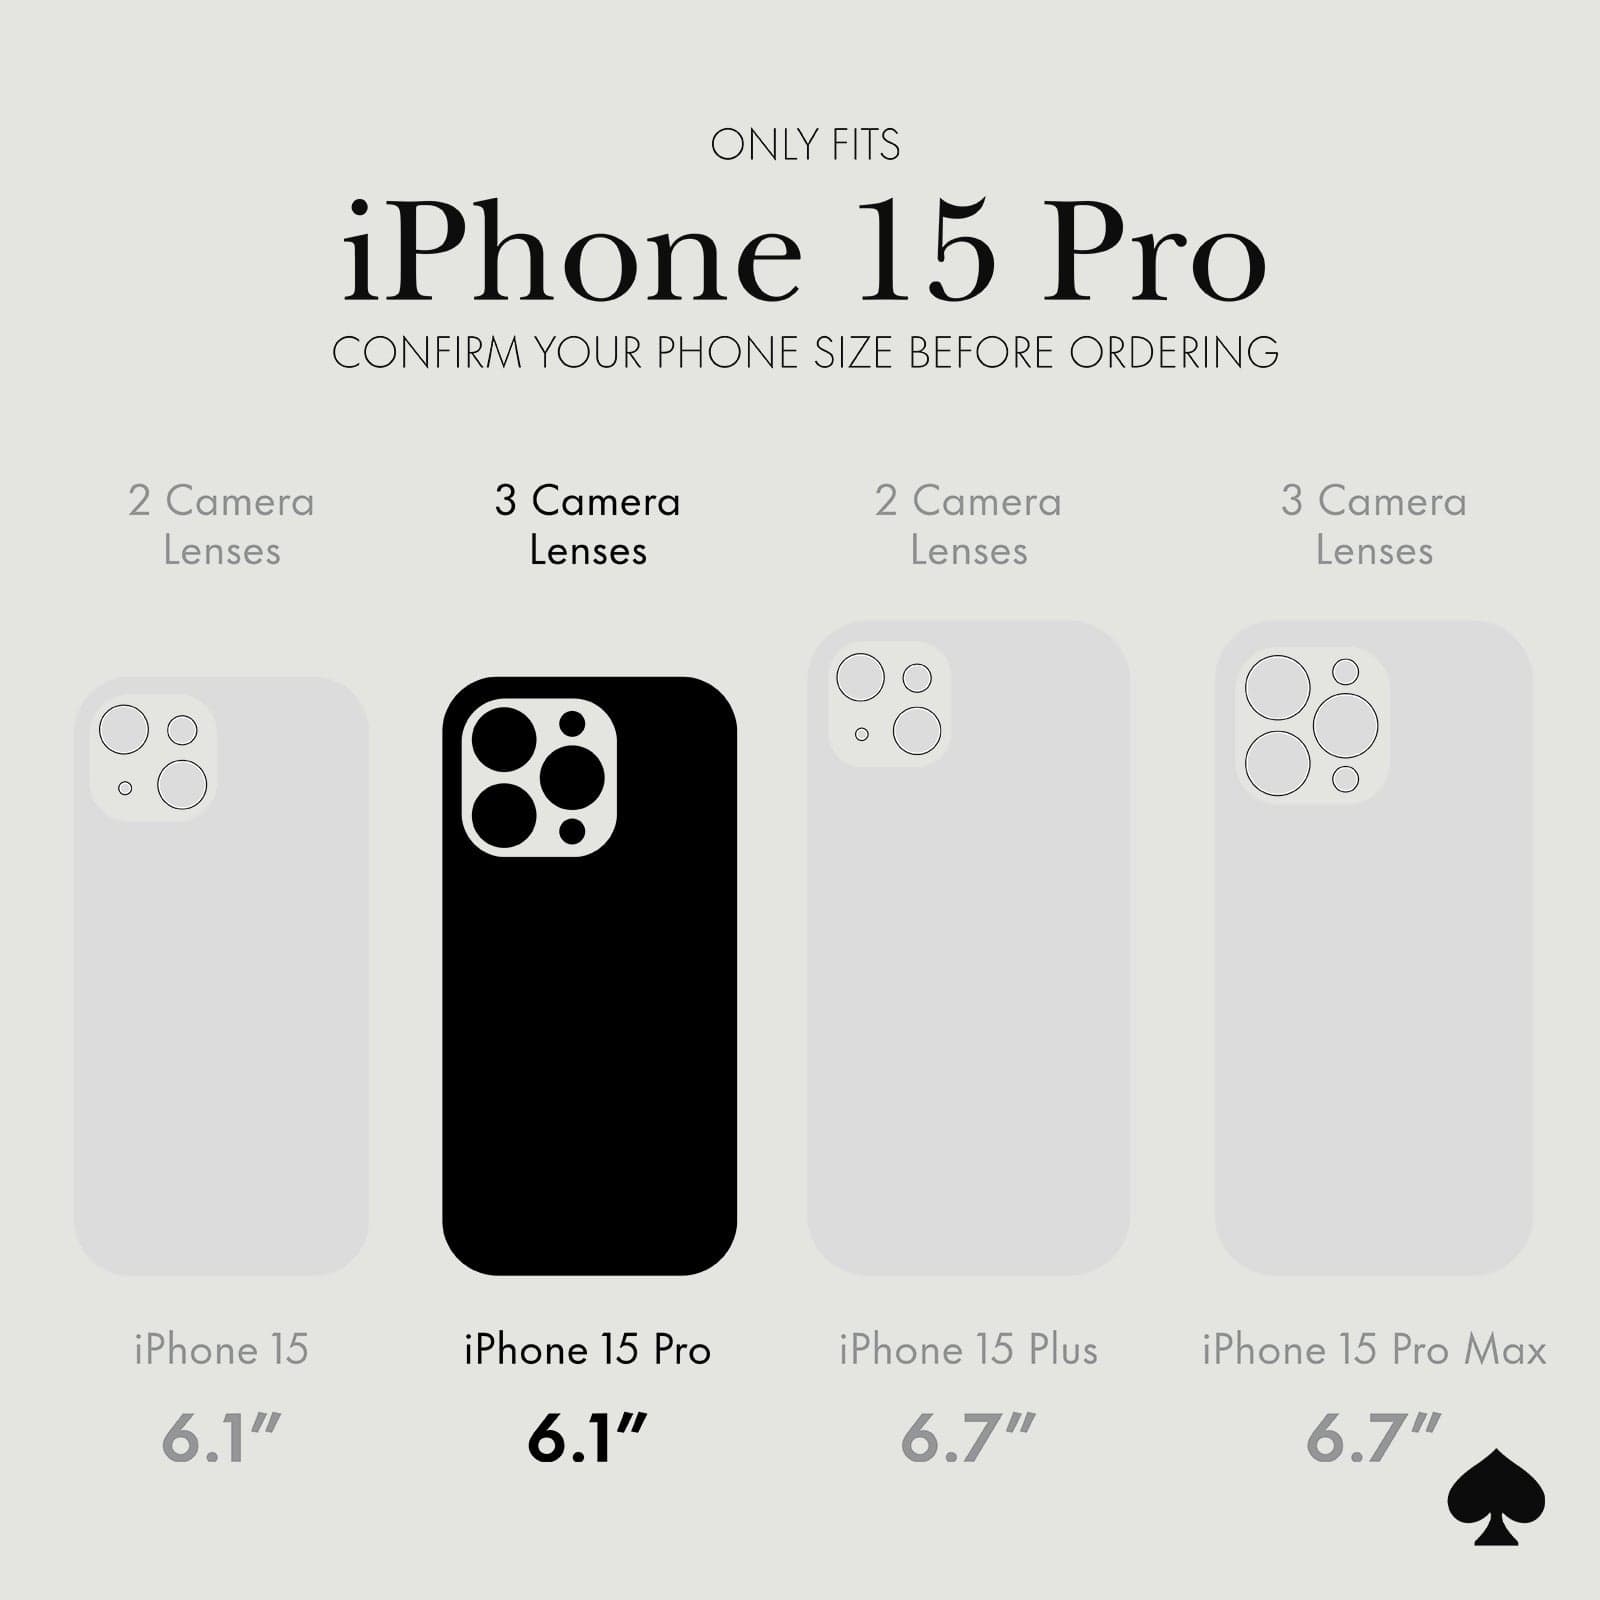 ONLY FITS IPHONE 15 PRO. CONFIRM YOUR PHONE SIZE BEFORE ORDERING'